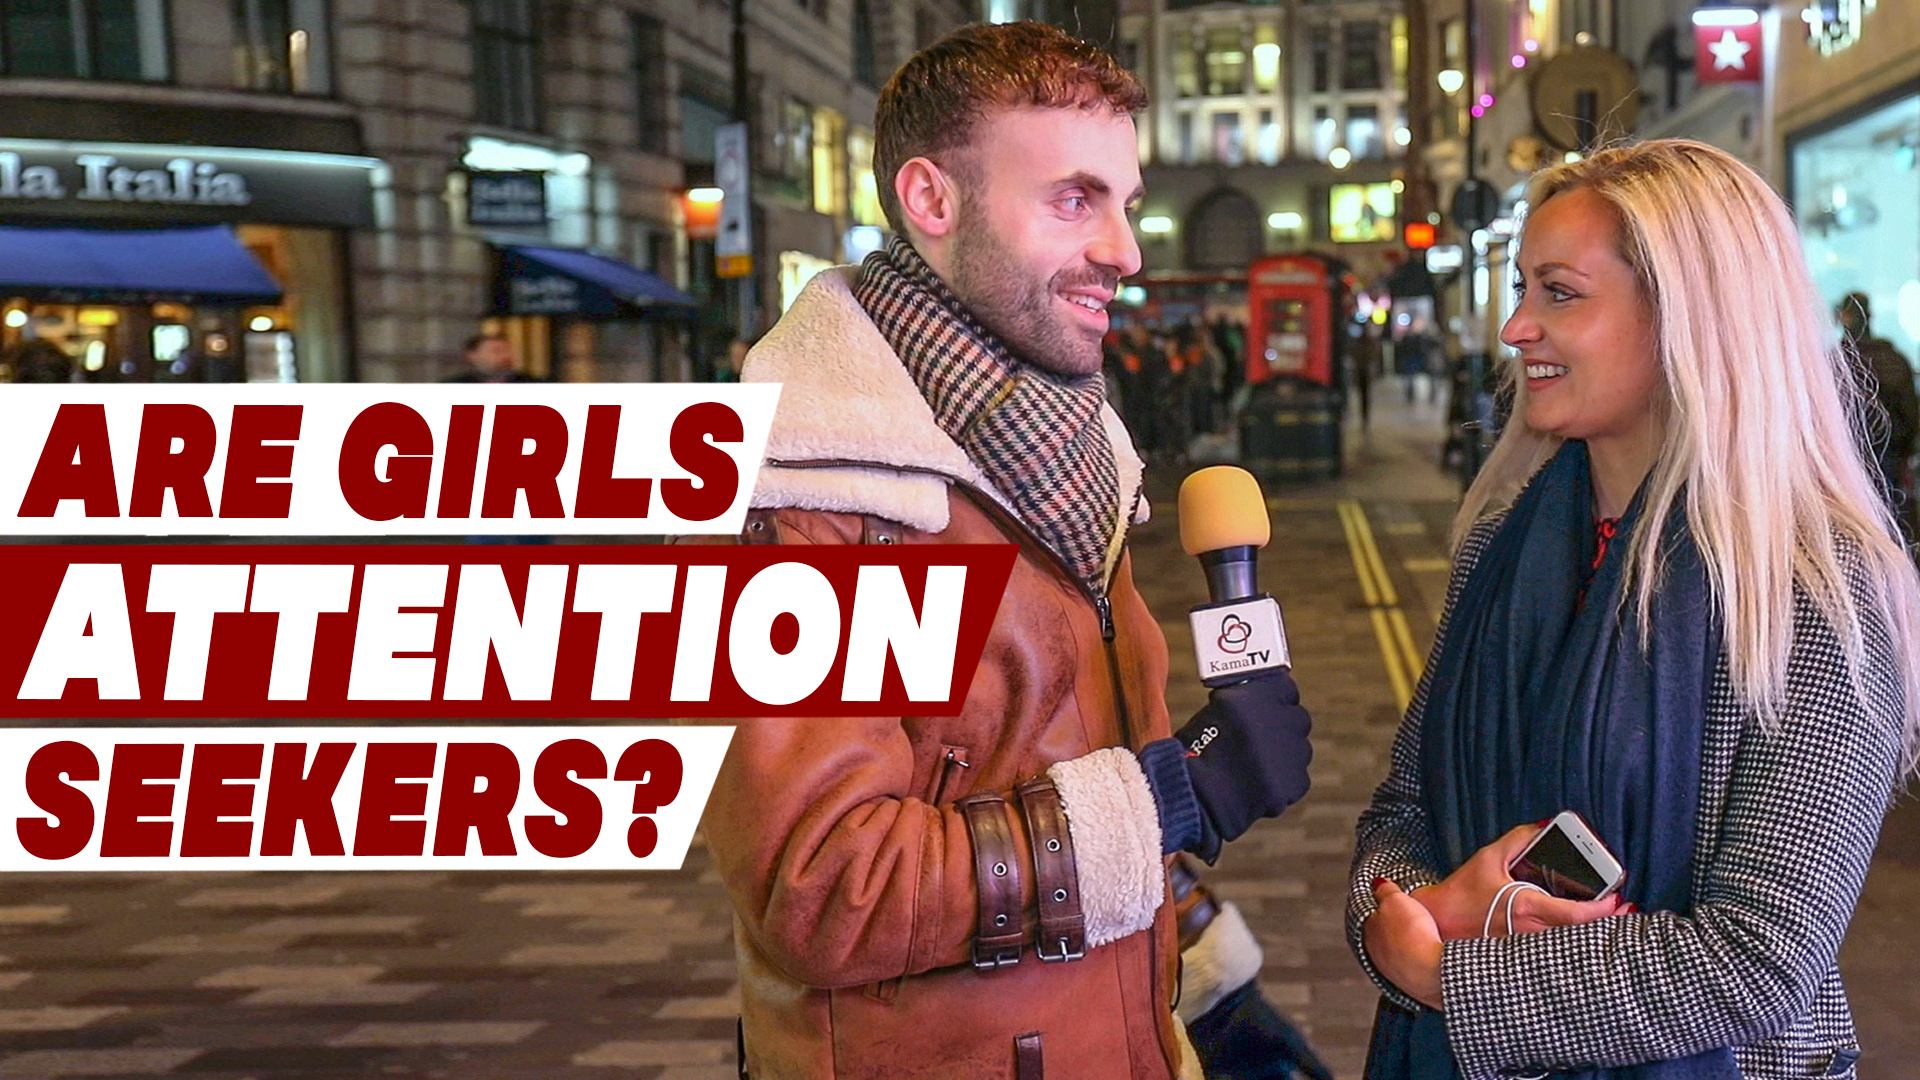 Are girls attention seekers?